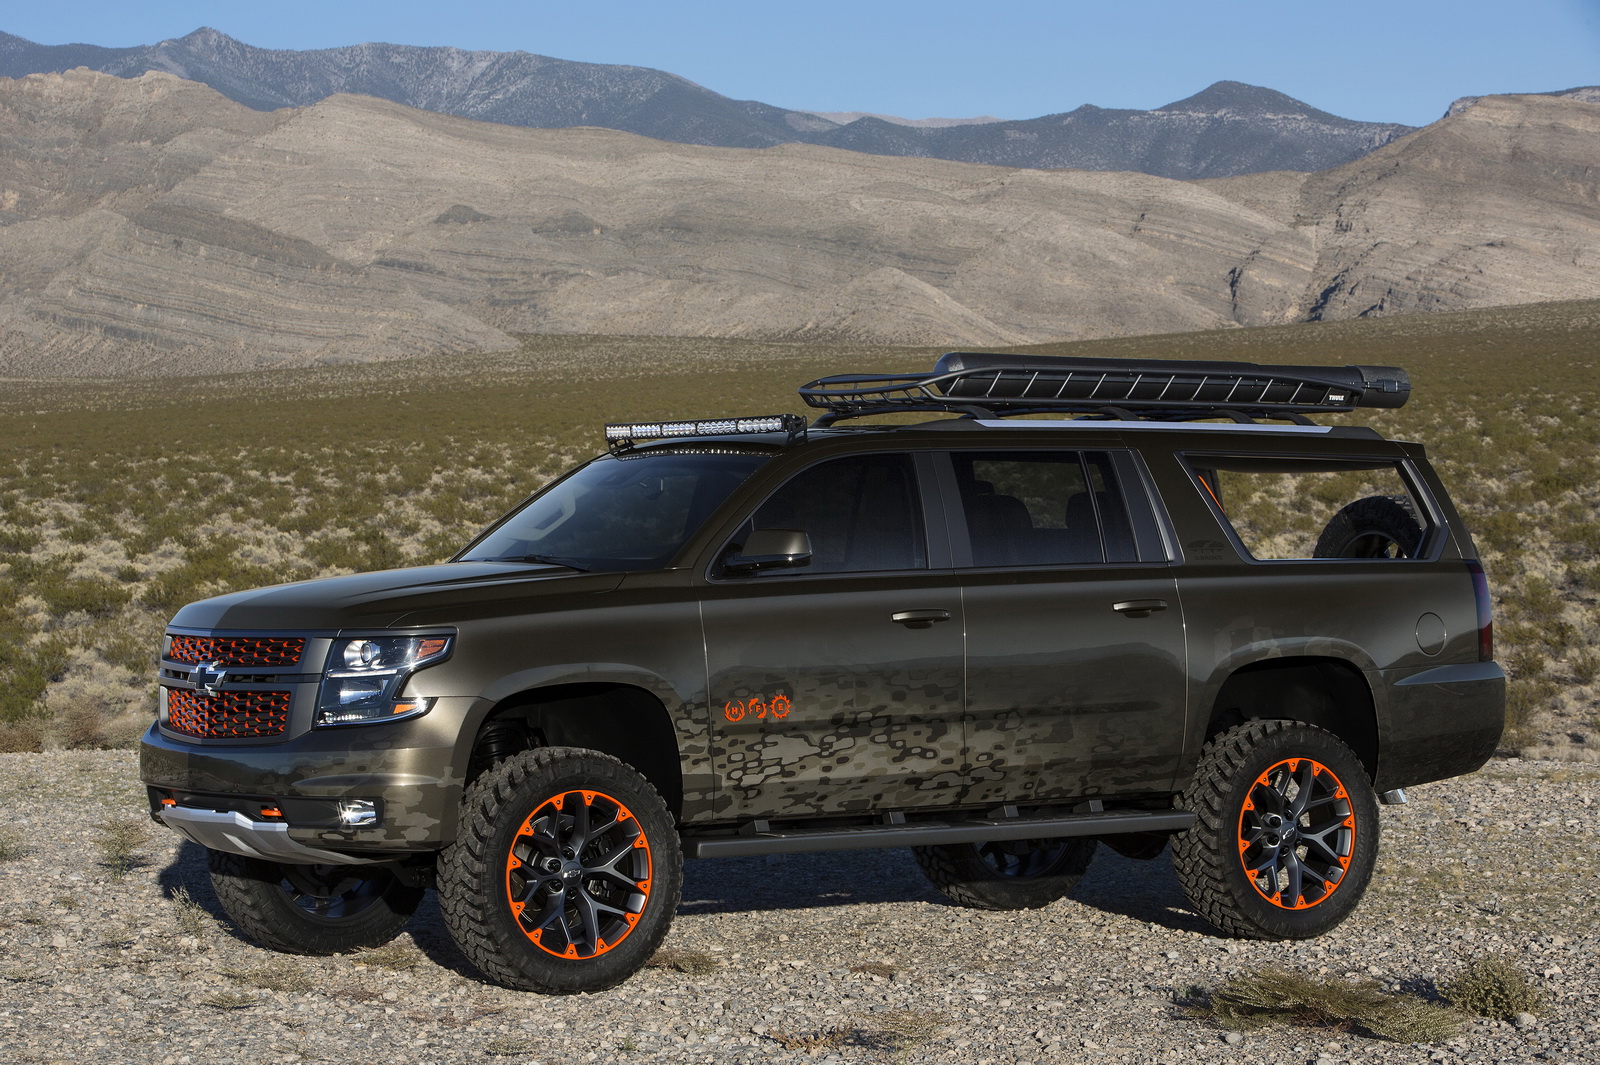 Country music superstar Luke Bryan has teamed up with Chevrolet to create a bold, stylized Suburban concept introduced at the 2017 SEMA Show. The concept speaks to Luke’s “Huntin, Fishin’ and Lovin’ Every Day” outlook.